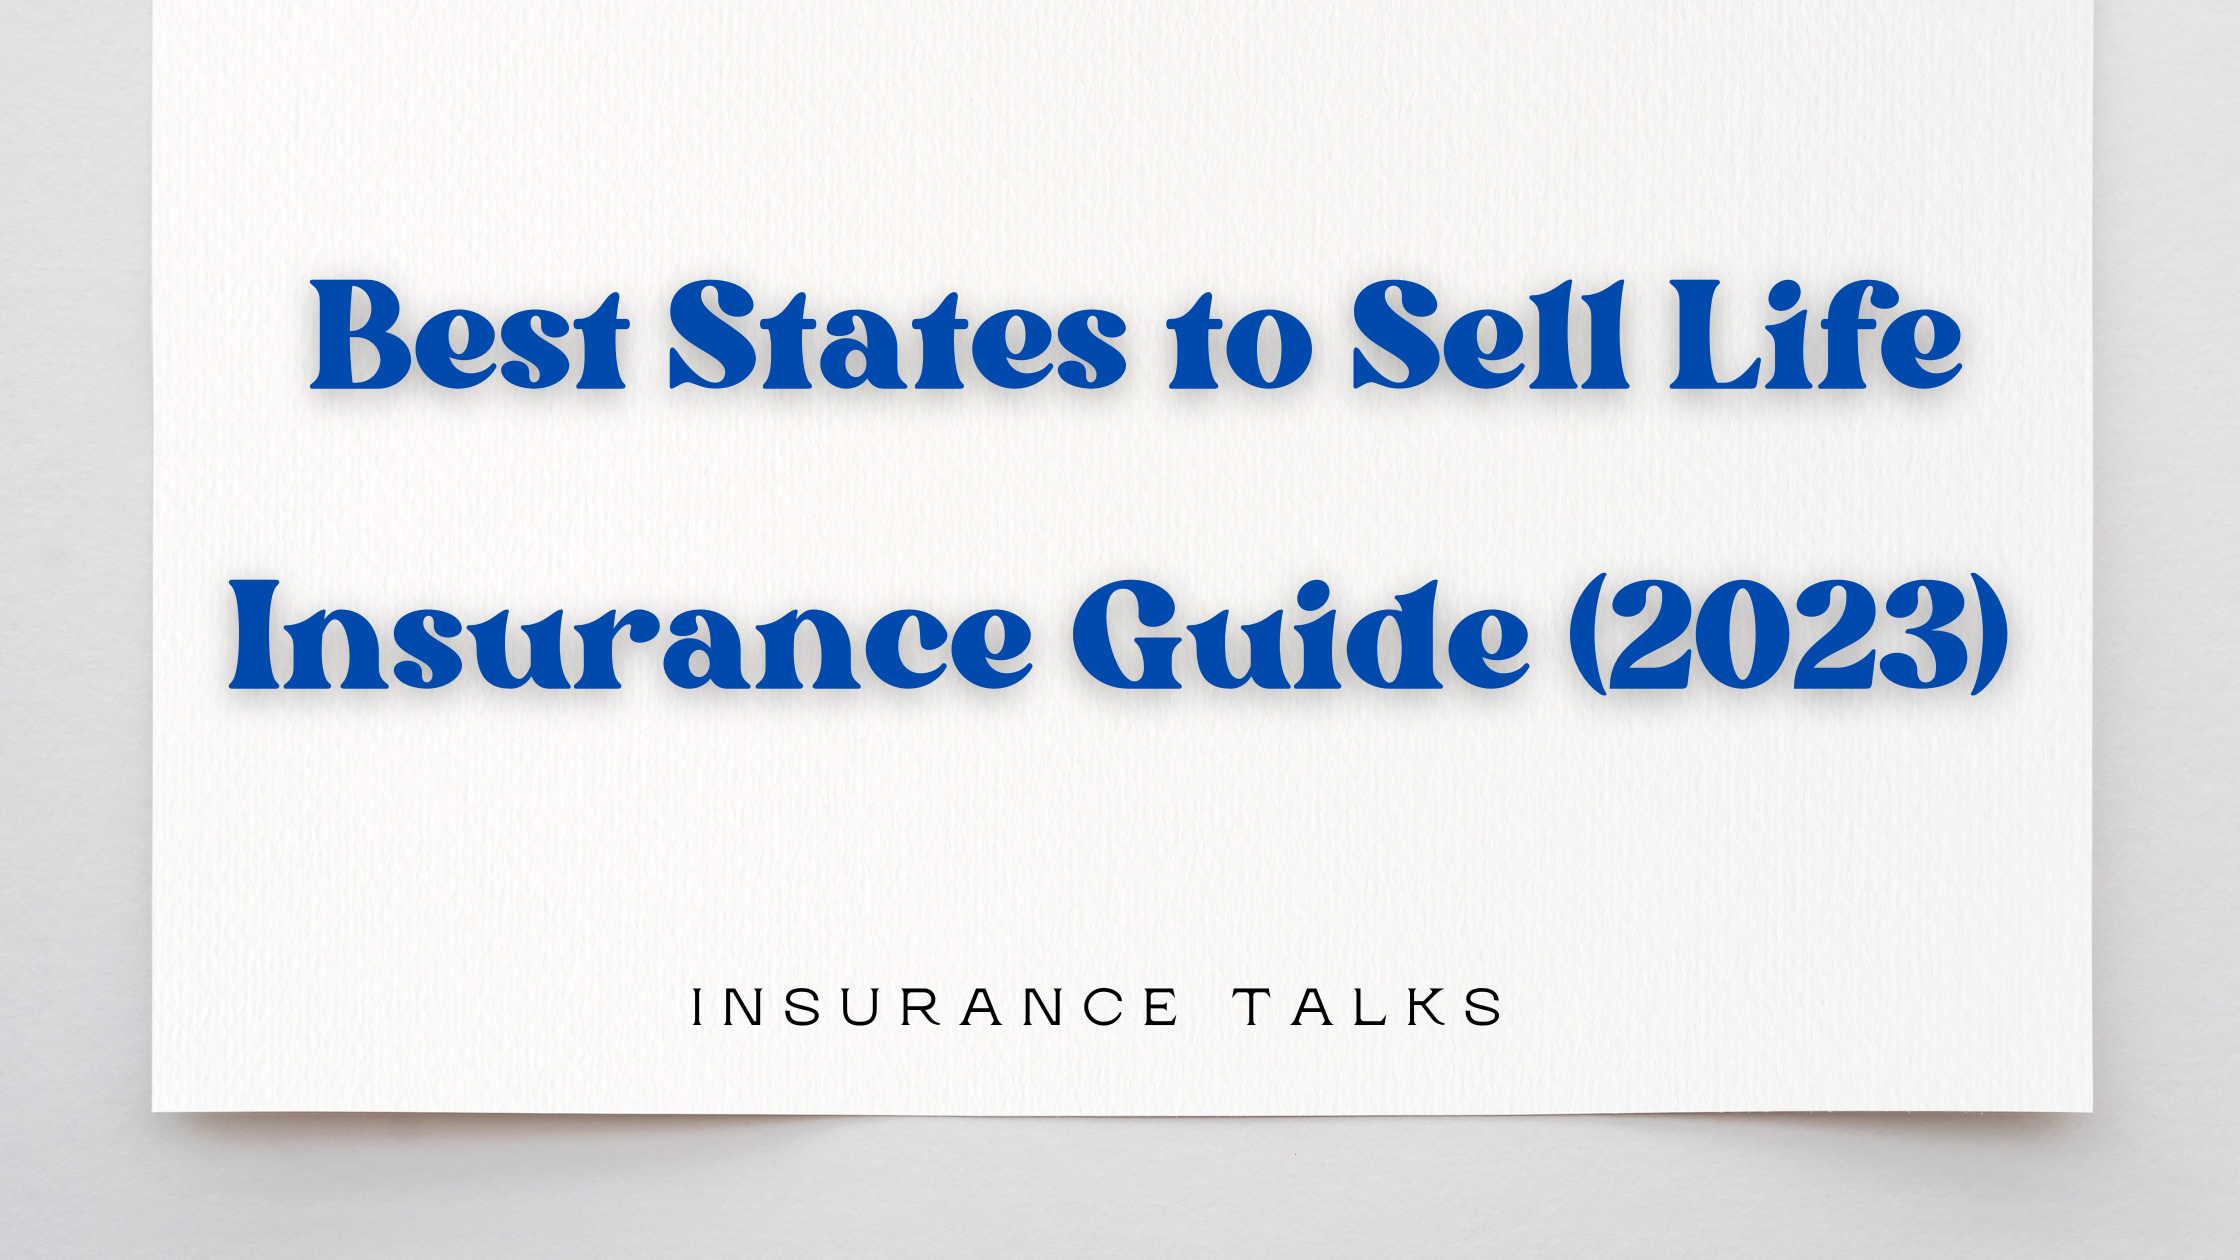 10 Best States to Sell Life Insurance Guide (2023)